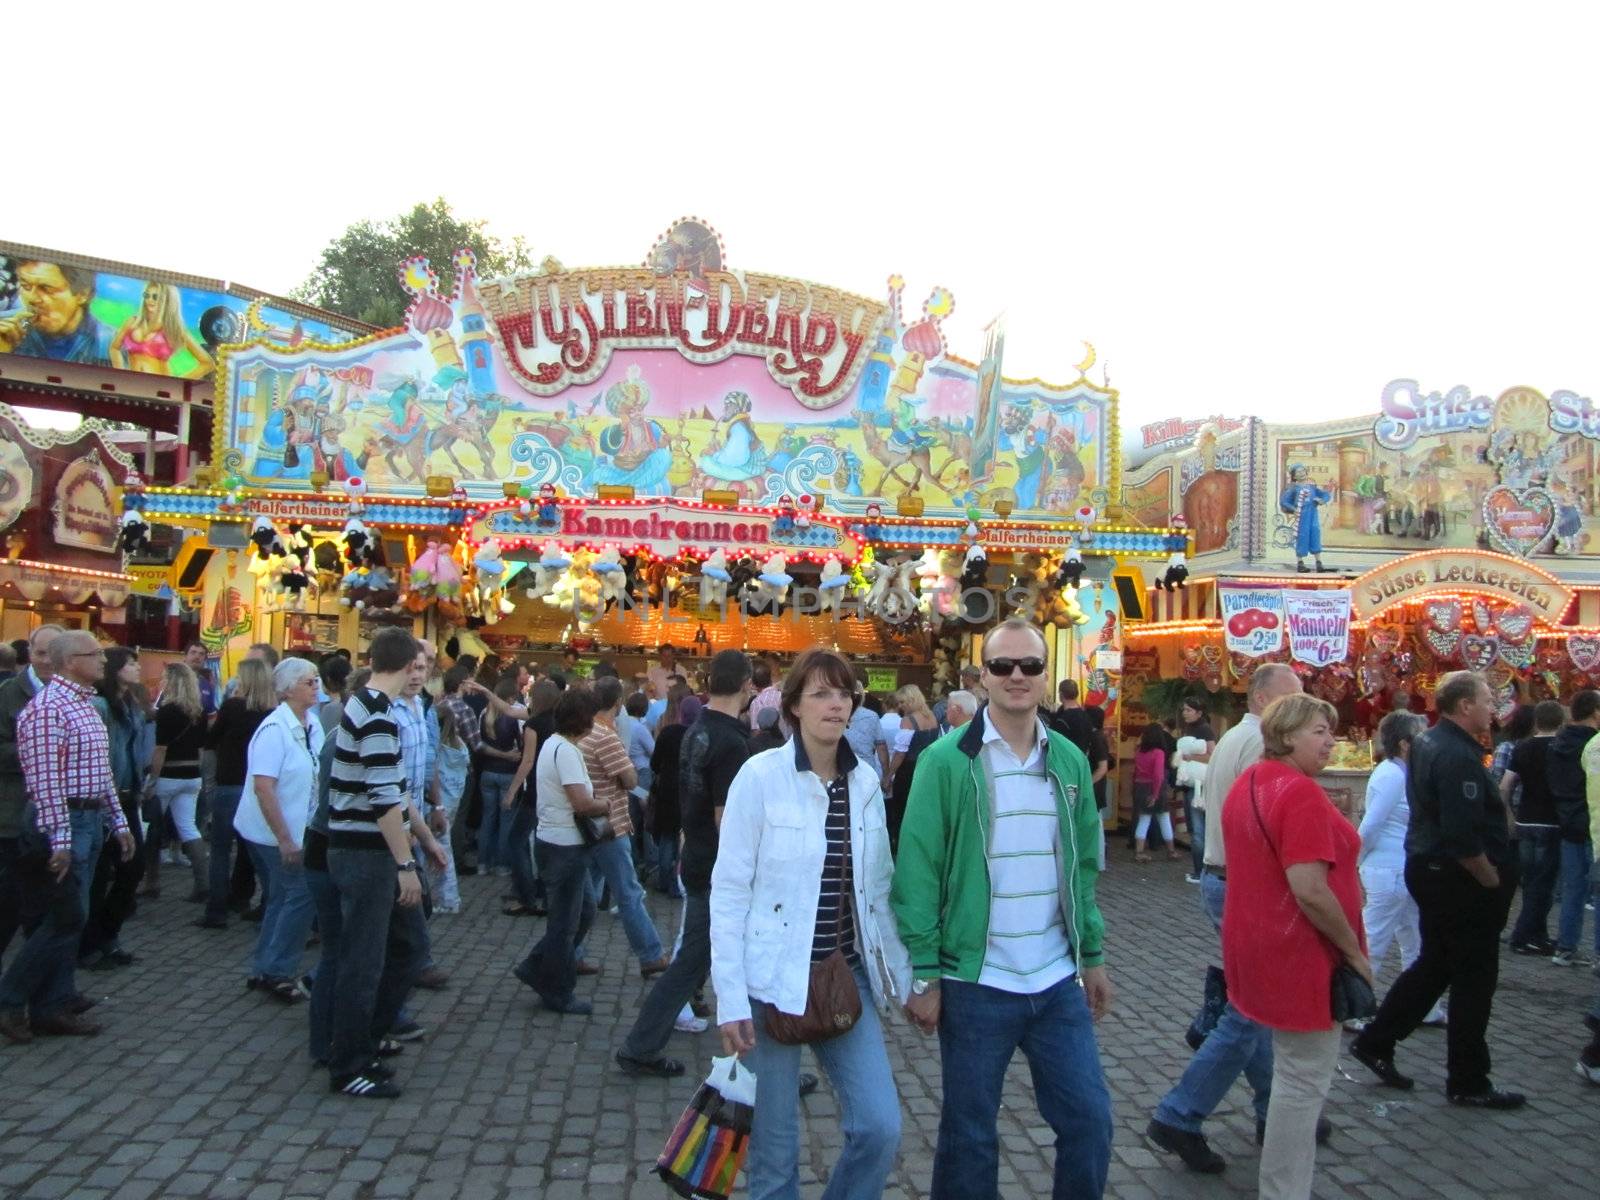 DUSSELDORF, GERMANY - JULY 24: Unidentified visitors near a horse racing game at Kirmes on July 24, 2010 in Dusseldorf, Germany. Kirmes is the biggest summer fair on the north Rhein in Germany.              